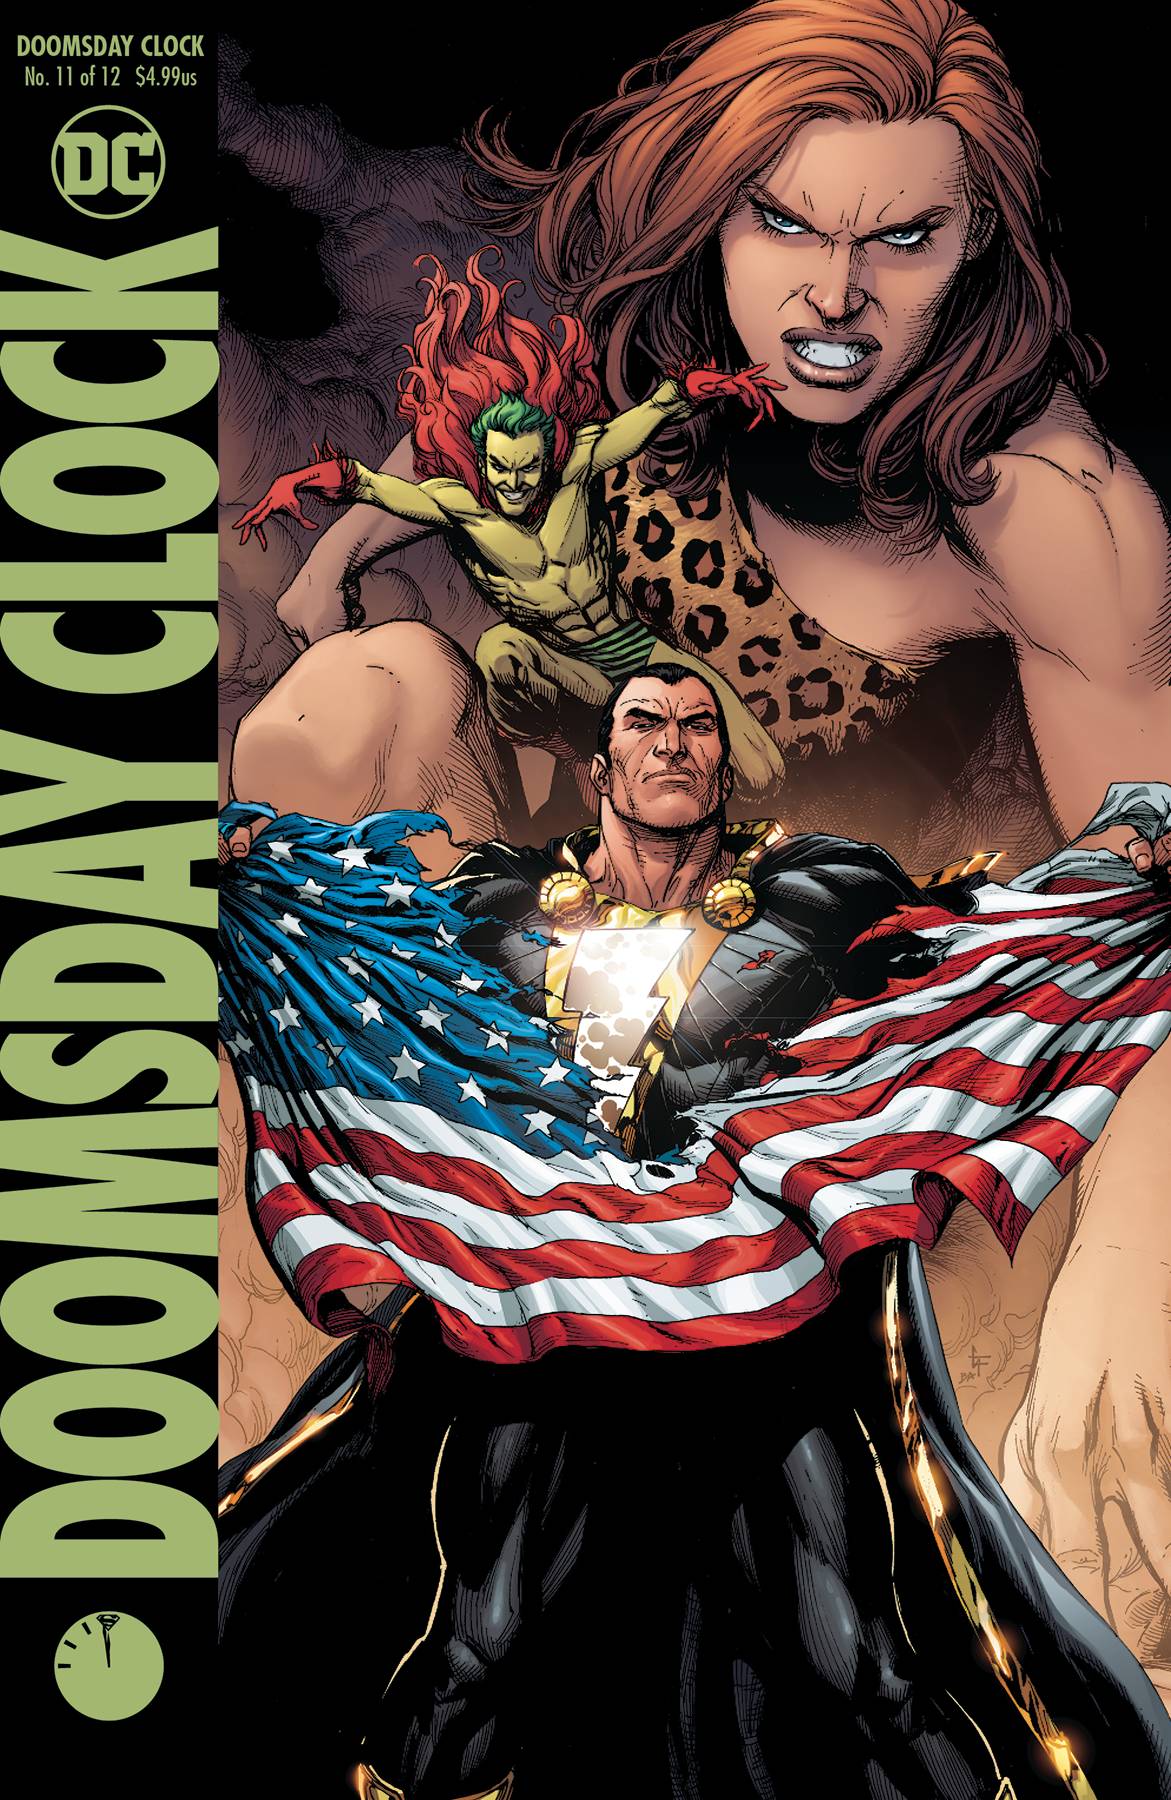 Doomsday Clock #11 Variant Edition (Of 12)